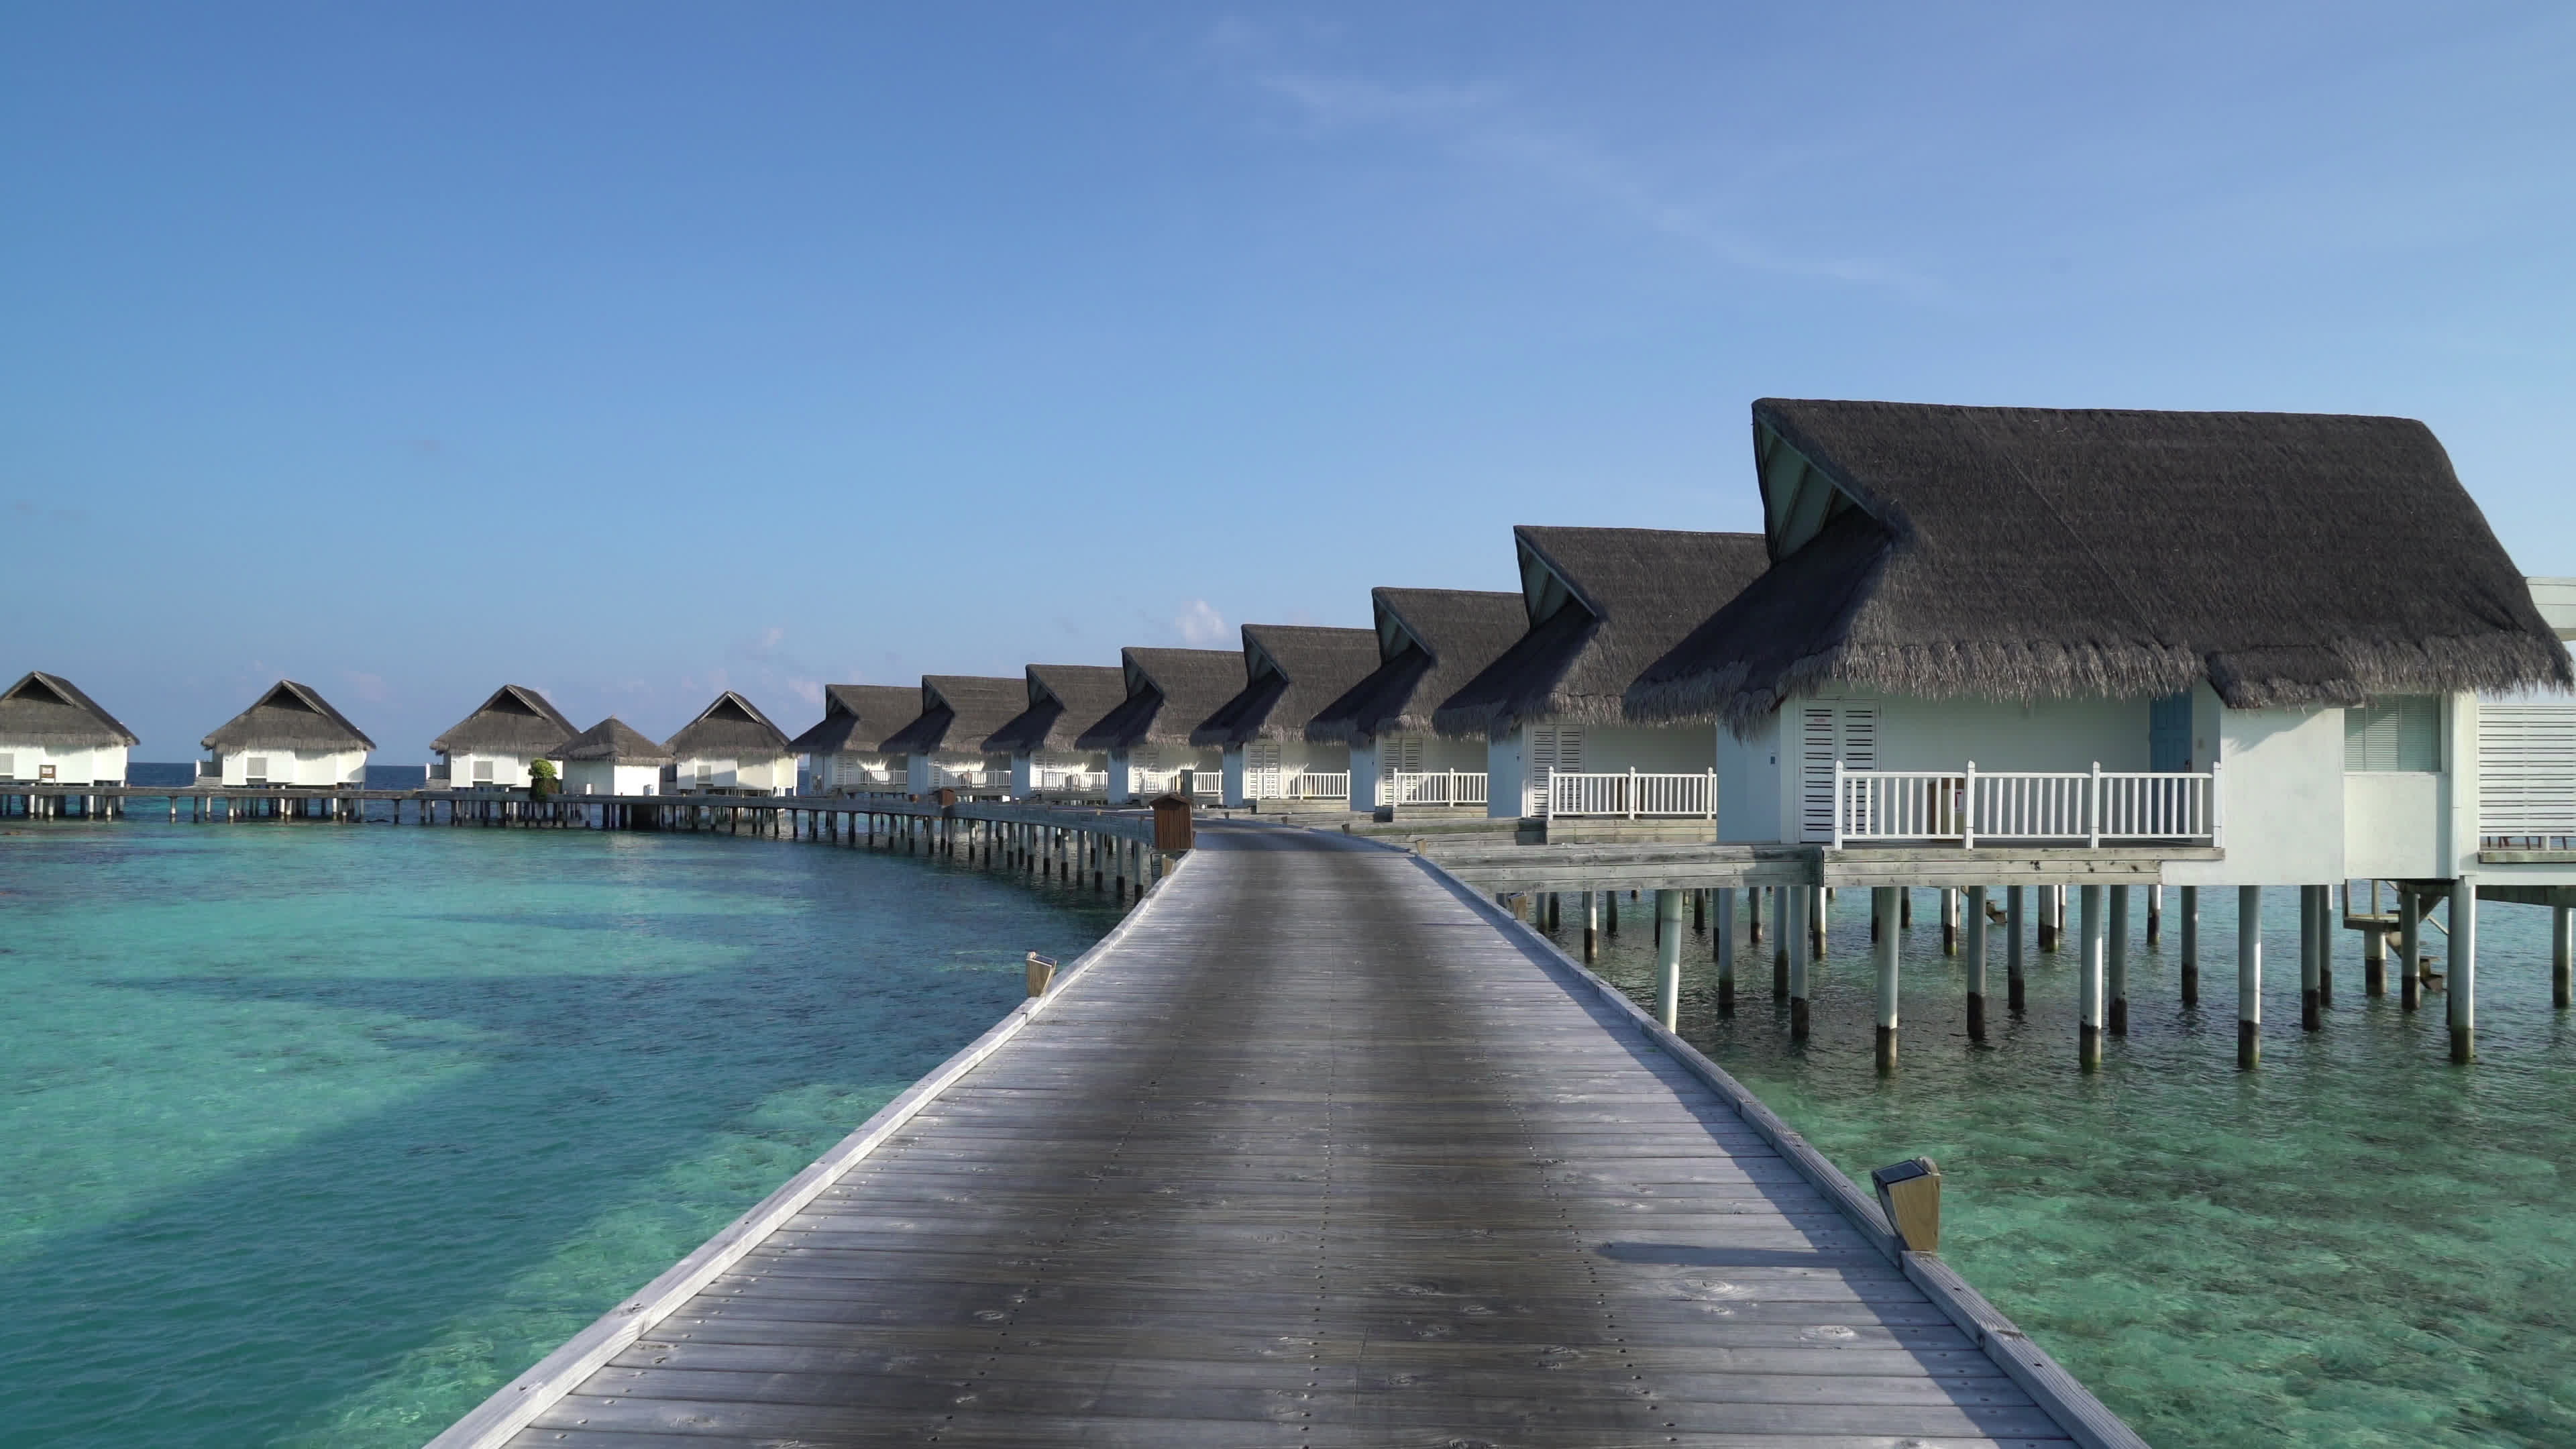 Bungalow: Maldives resort facility, Single-story houses surrounded by verandas, Vacation at the ocean. 3840x2160 4K Background.